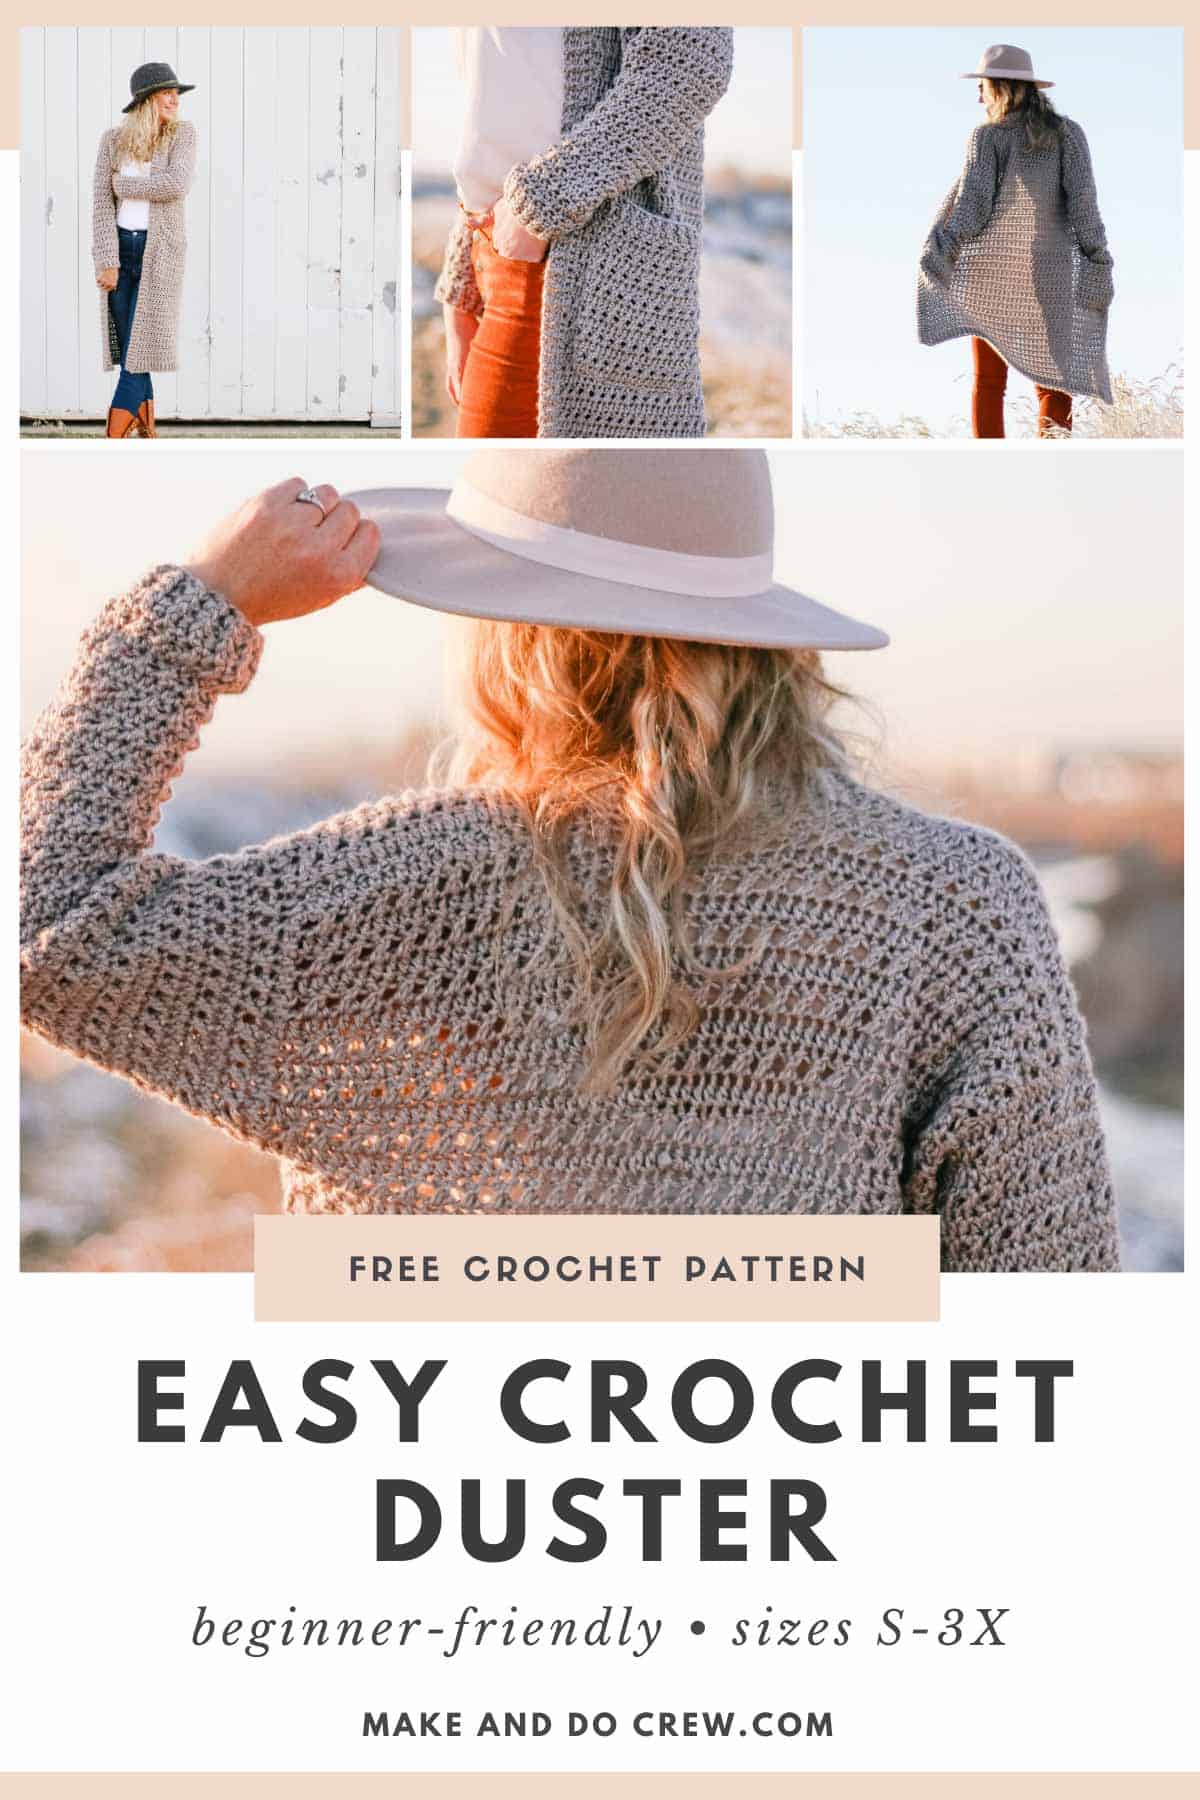 A 4-photo grid of a woman wearing a fedora hat and a gray-colored long easy crochet duster cardigan with pockets.